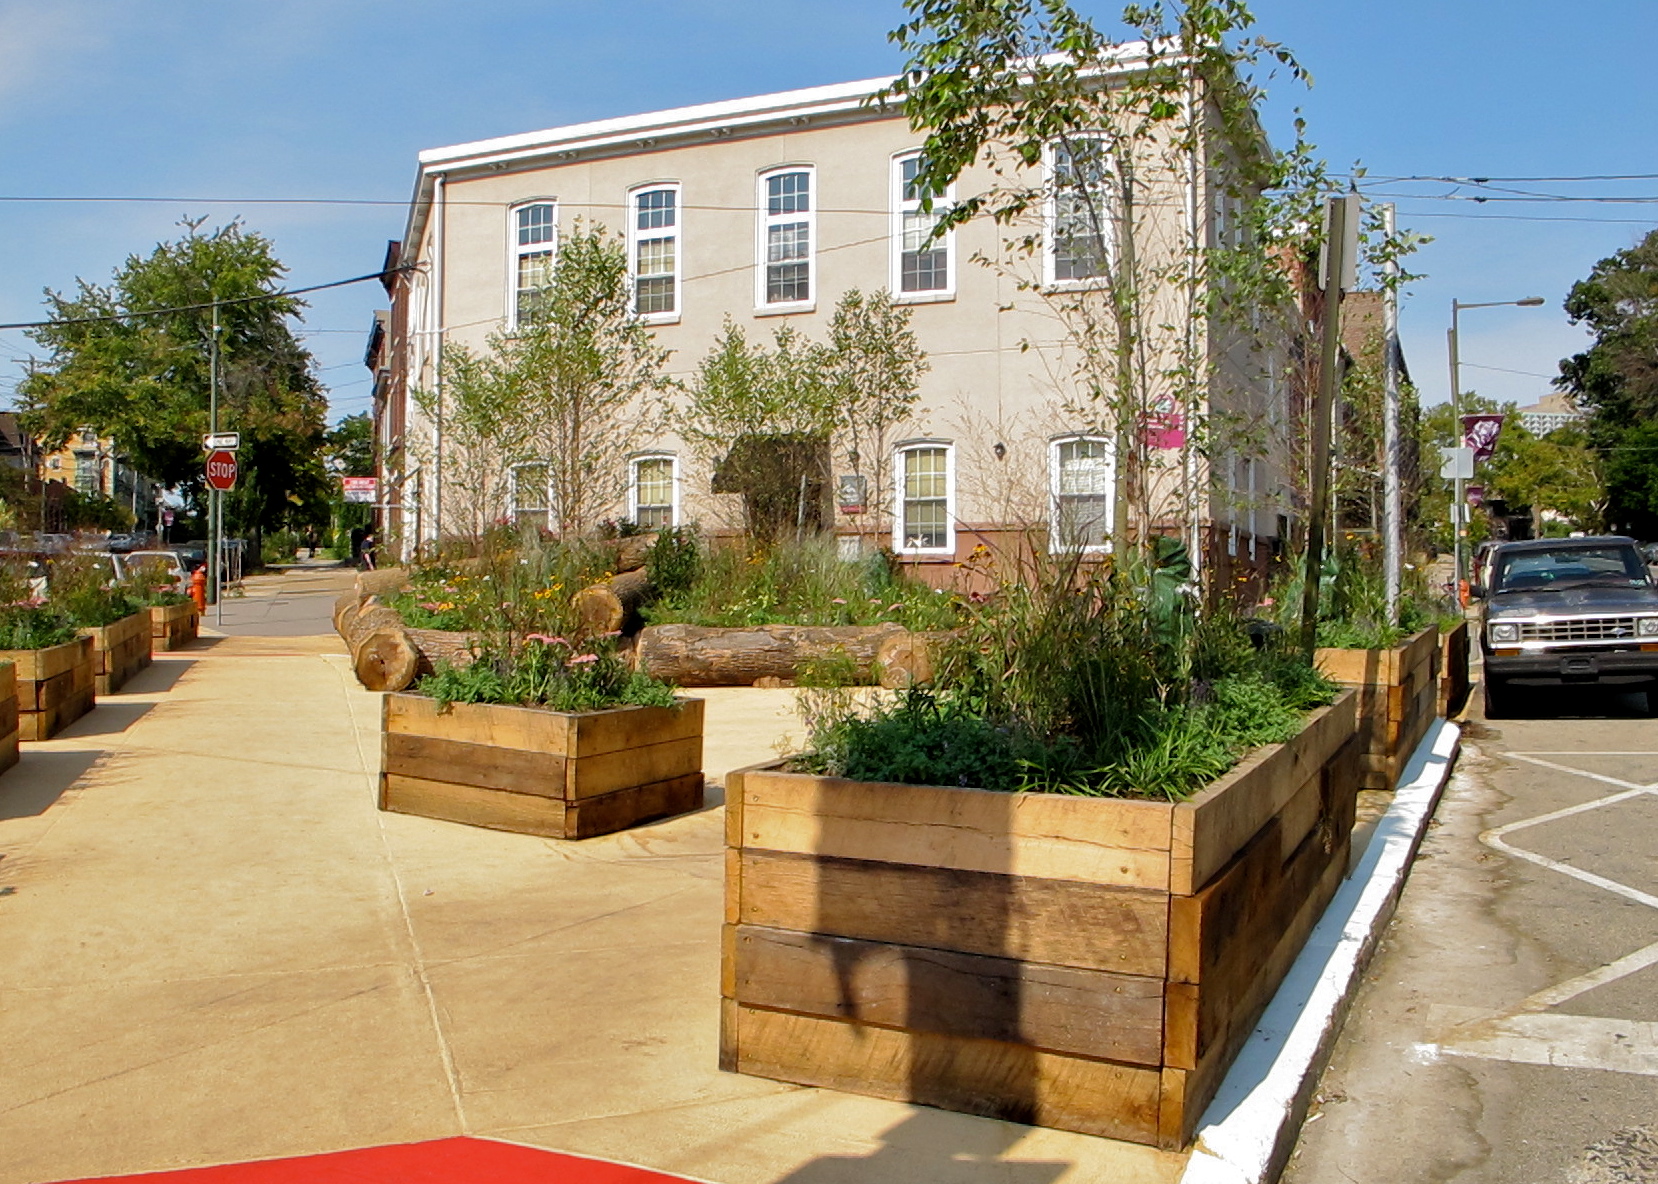 (Woodland Green's planters are partly constructed from salvaged wood joists from a house rehab in University City.)